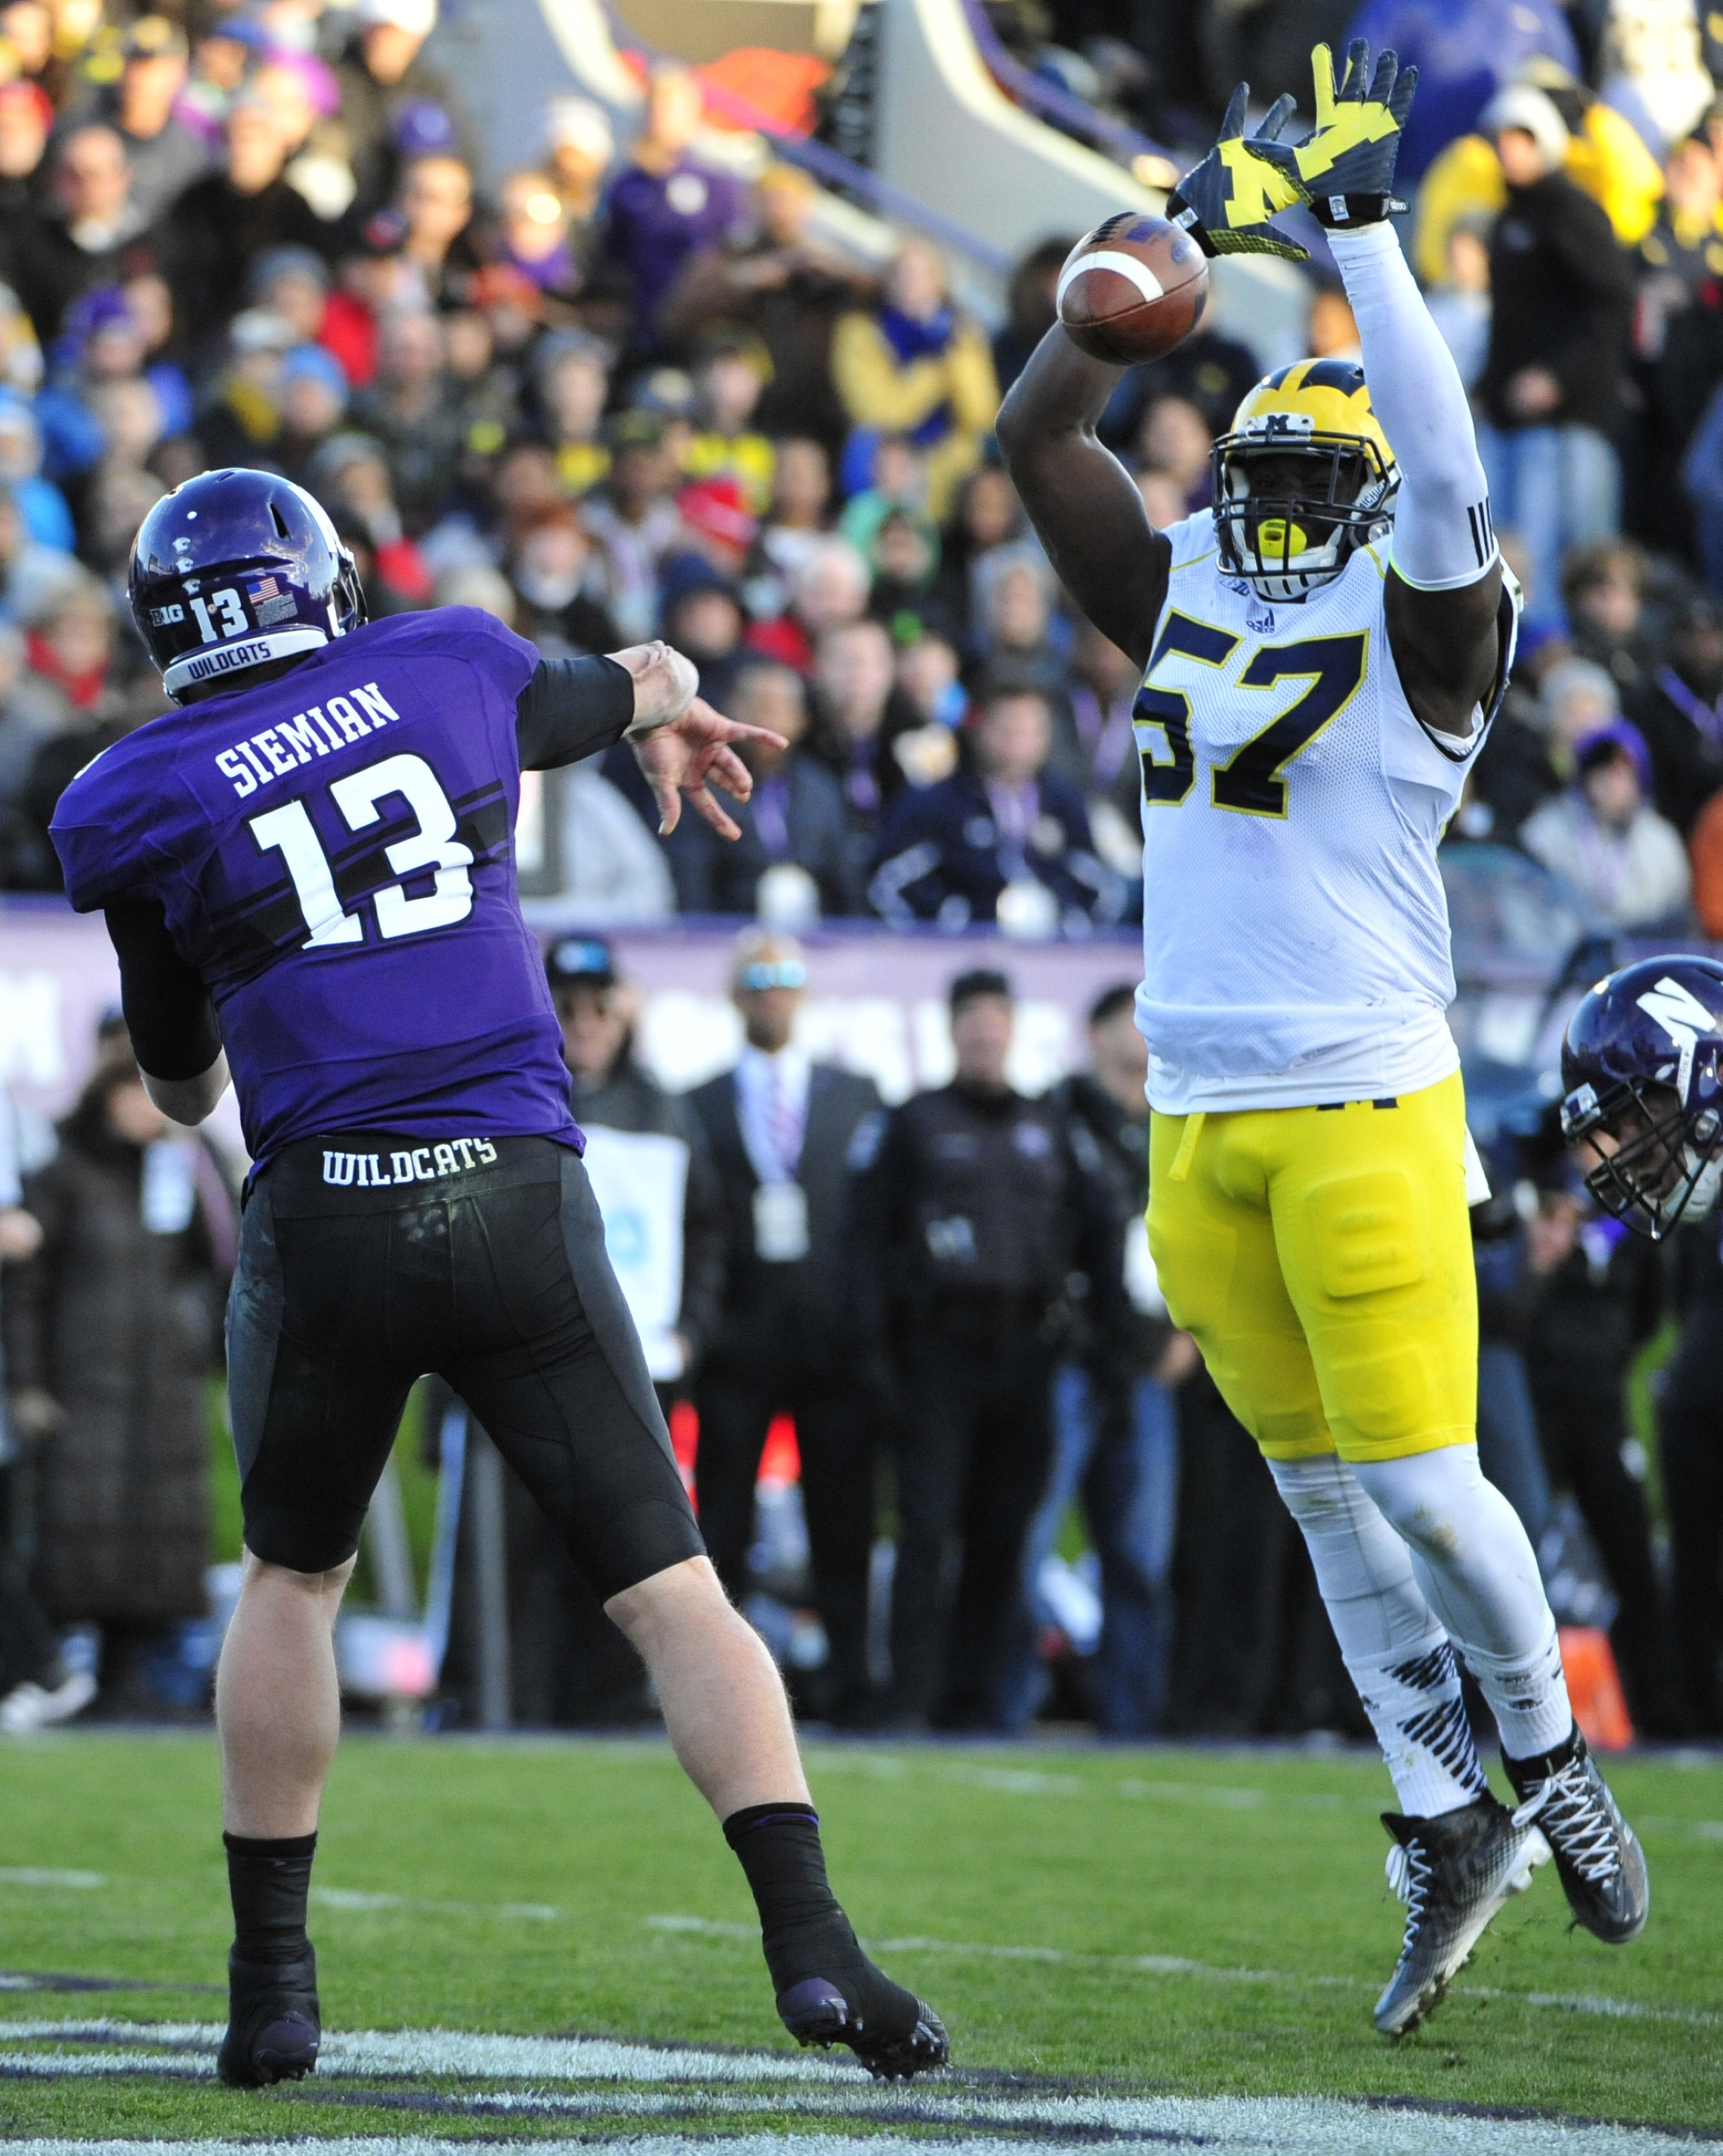 EVANSTON IL - NOVEMBER 08: Frank Clark #57 of the Michigan Wolverines blocks a pass by Trevor Siemian #13 of the Northwestern Wildcats during the first half on November 8, 2014 at Ryan Field in Evanston, Illinois.  (Photo by David Banks/Getty Images)